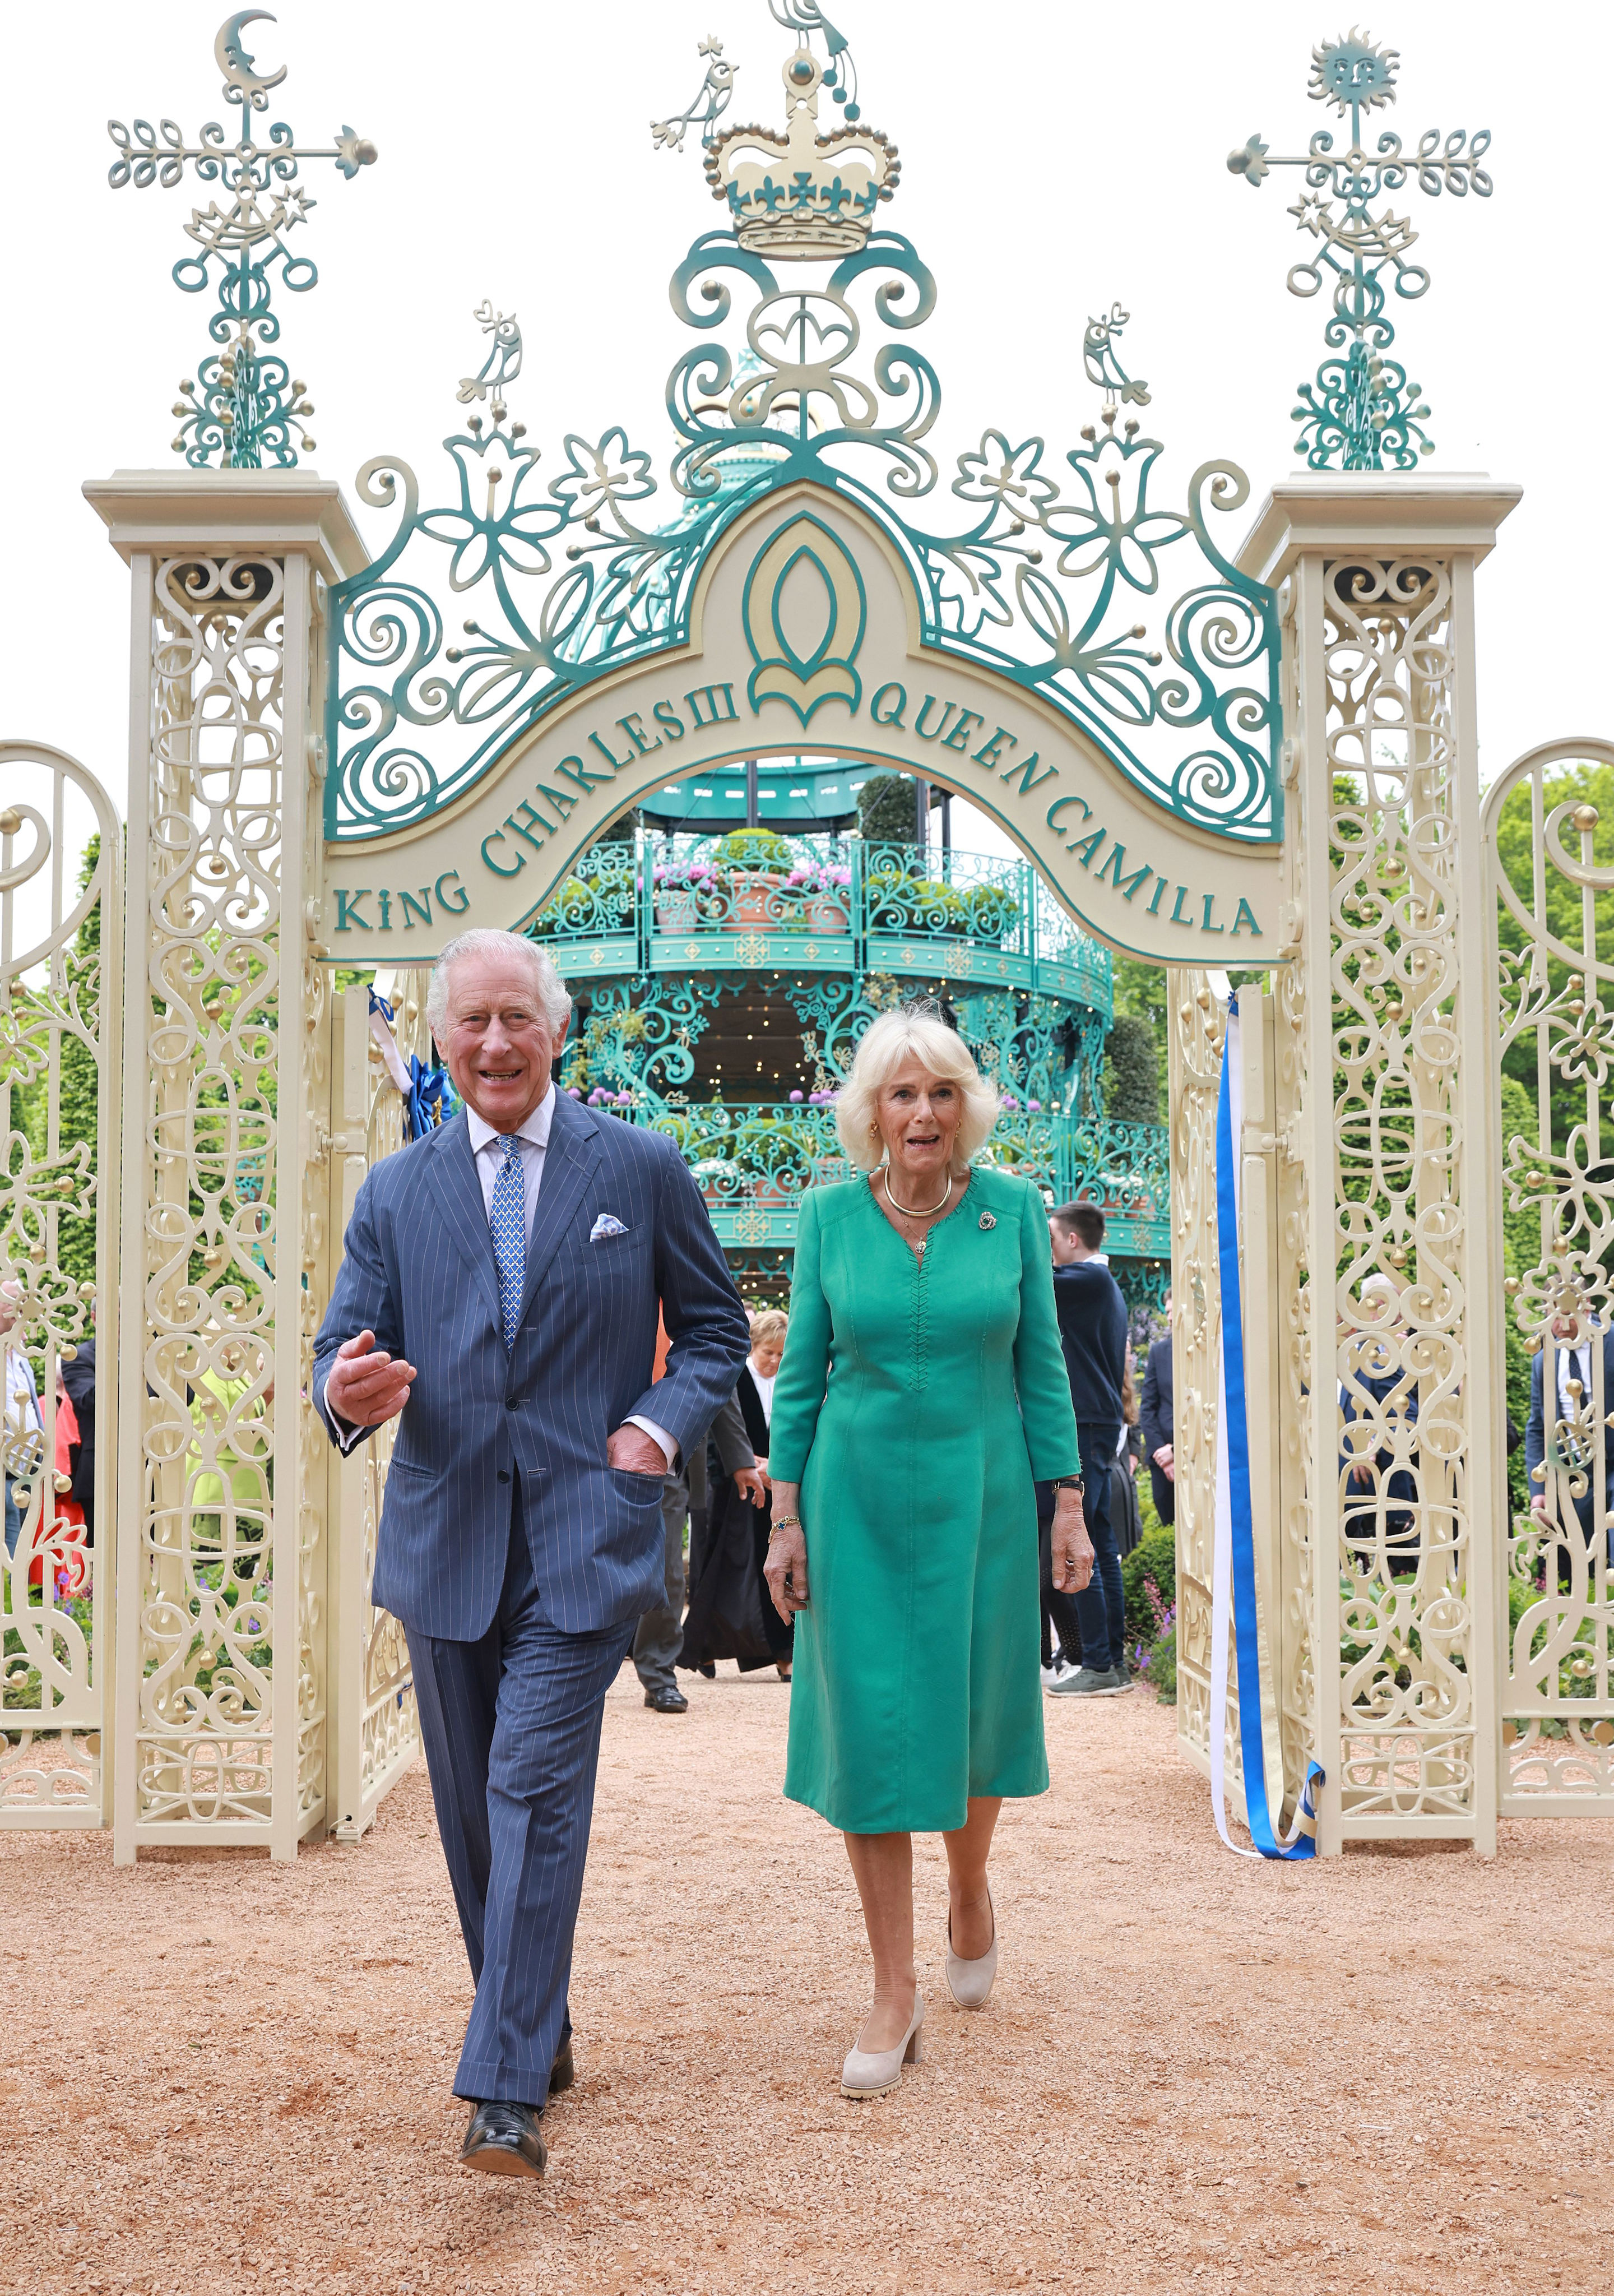 <p>King Charles III and Queen Camilla opened the new Coronation Garden in Newtownabbey, Northern Ireland, on day one of their two-day visit to the British nation on May 24, 2023 -- their first since their recent <a href="https://www.wonderwall.com/celebrity/the-coronation-of-king-charles-iii-and-queen-camilla-the-best-pictures-of-all-the-royals-at-this-historic-event-735015.gallery">coronation</a>.</p>